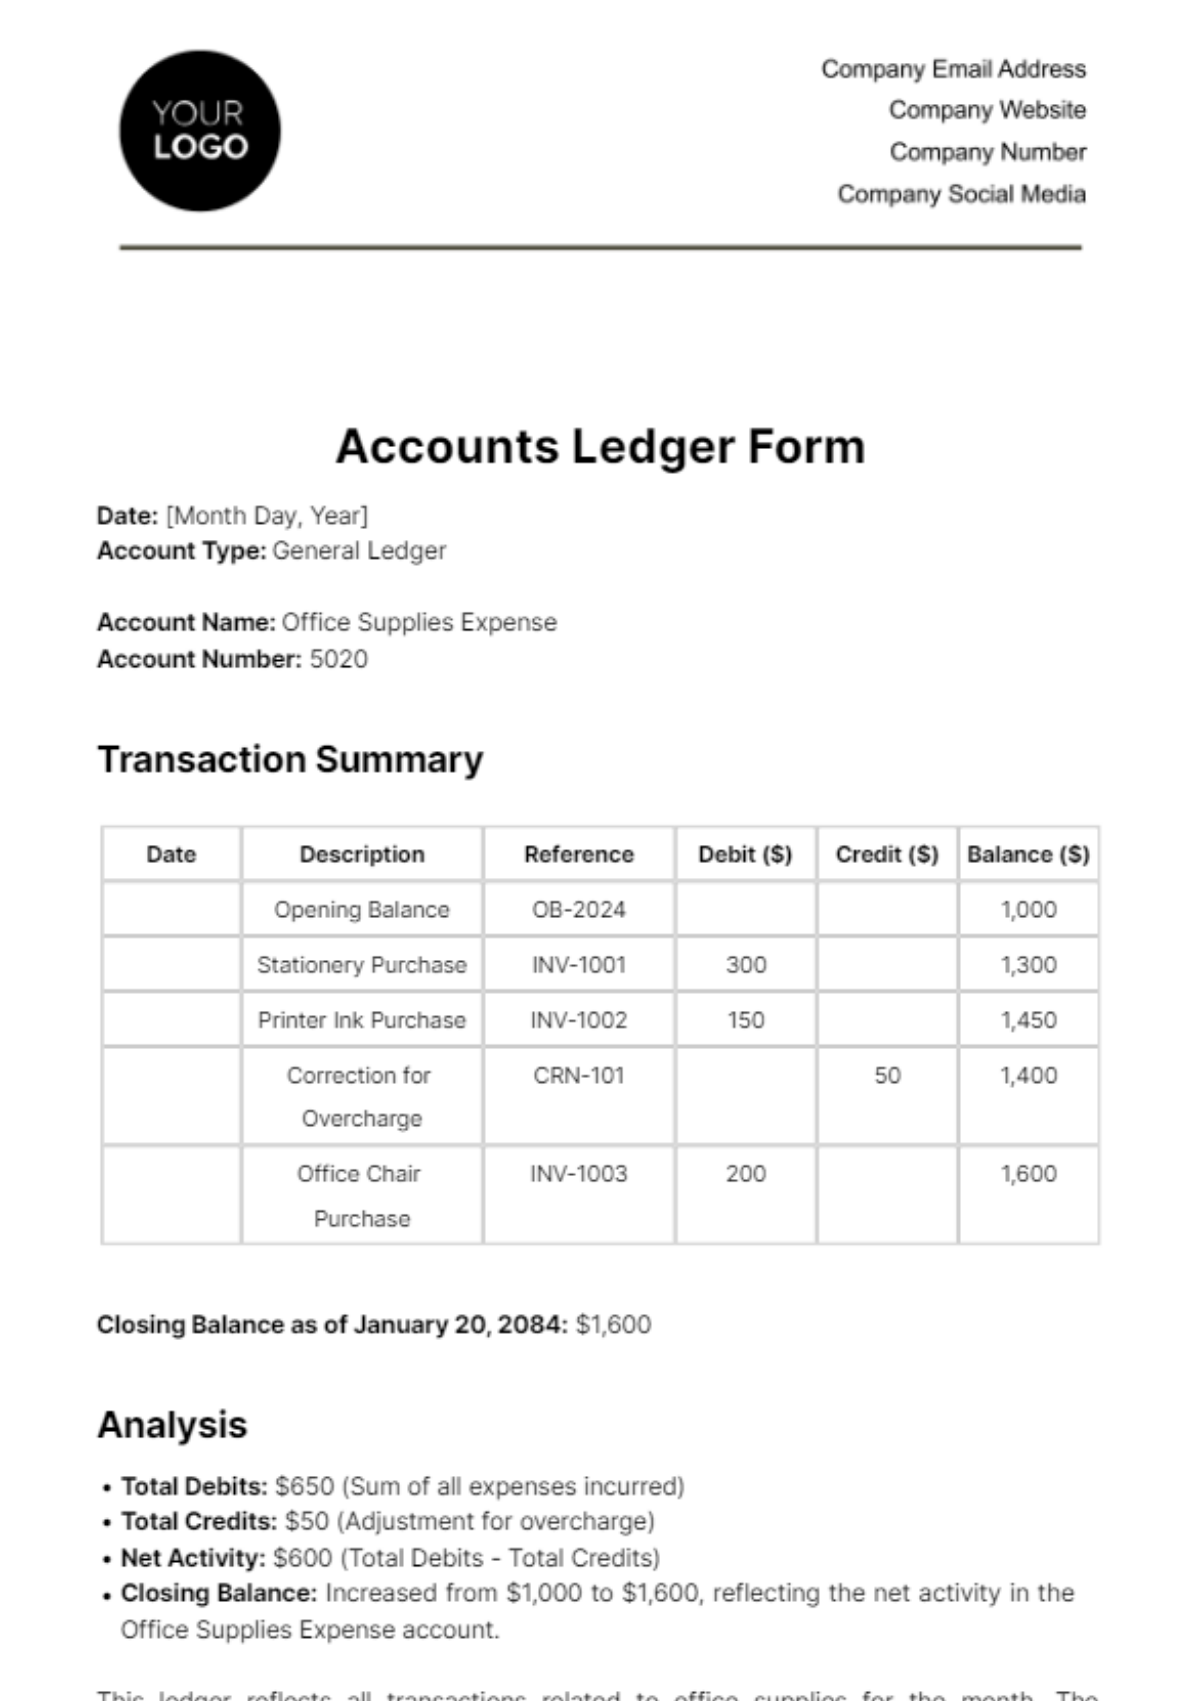 Free Accounts Ledger Form Template